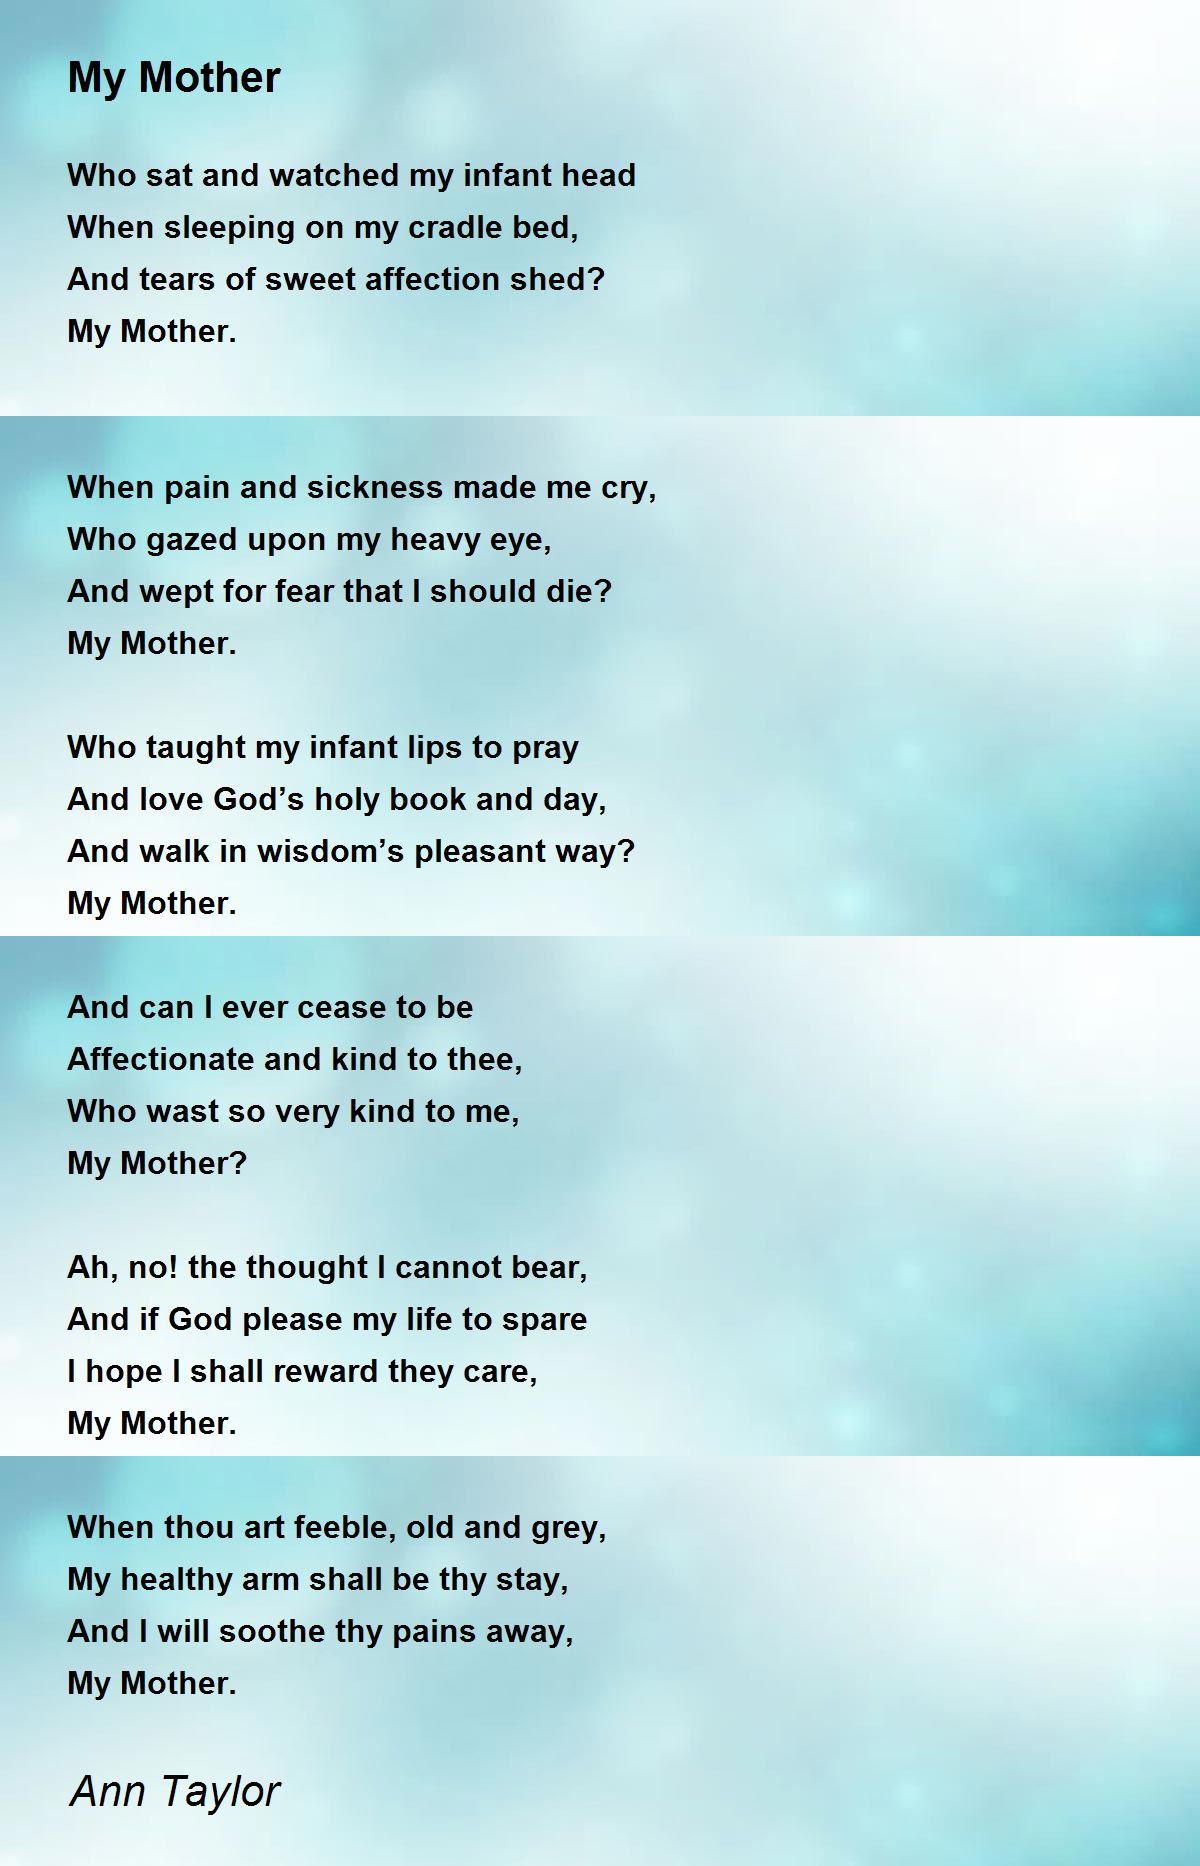 My Mother - My Mother Poem by Ann Taylor